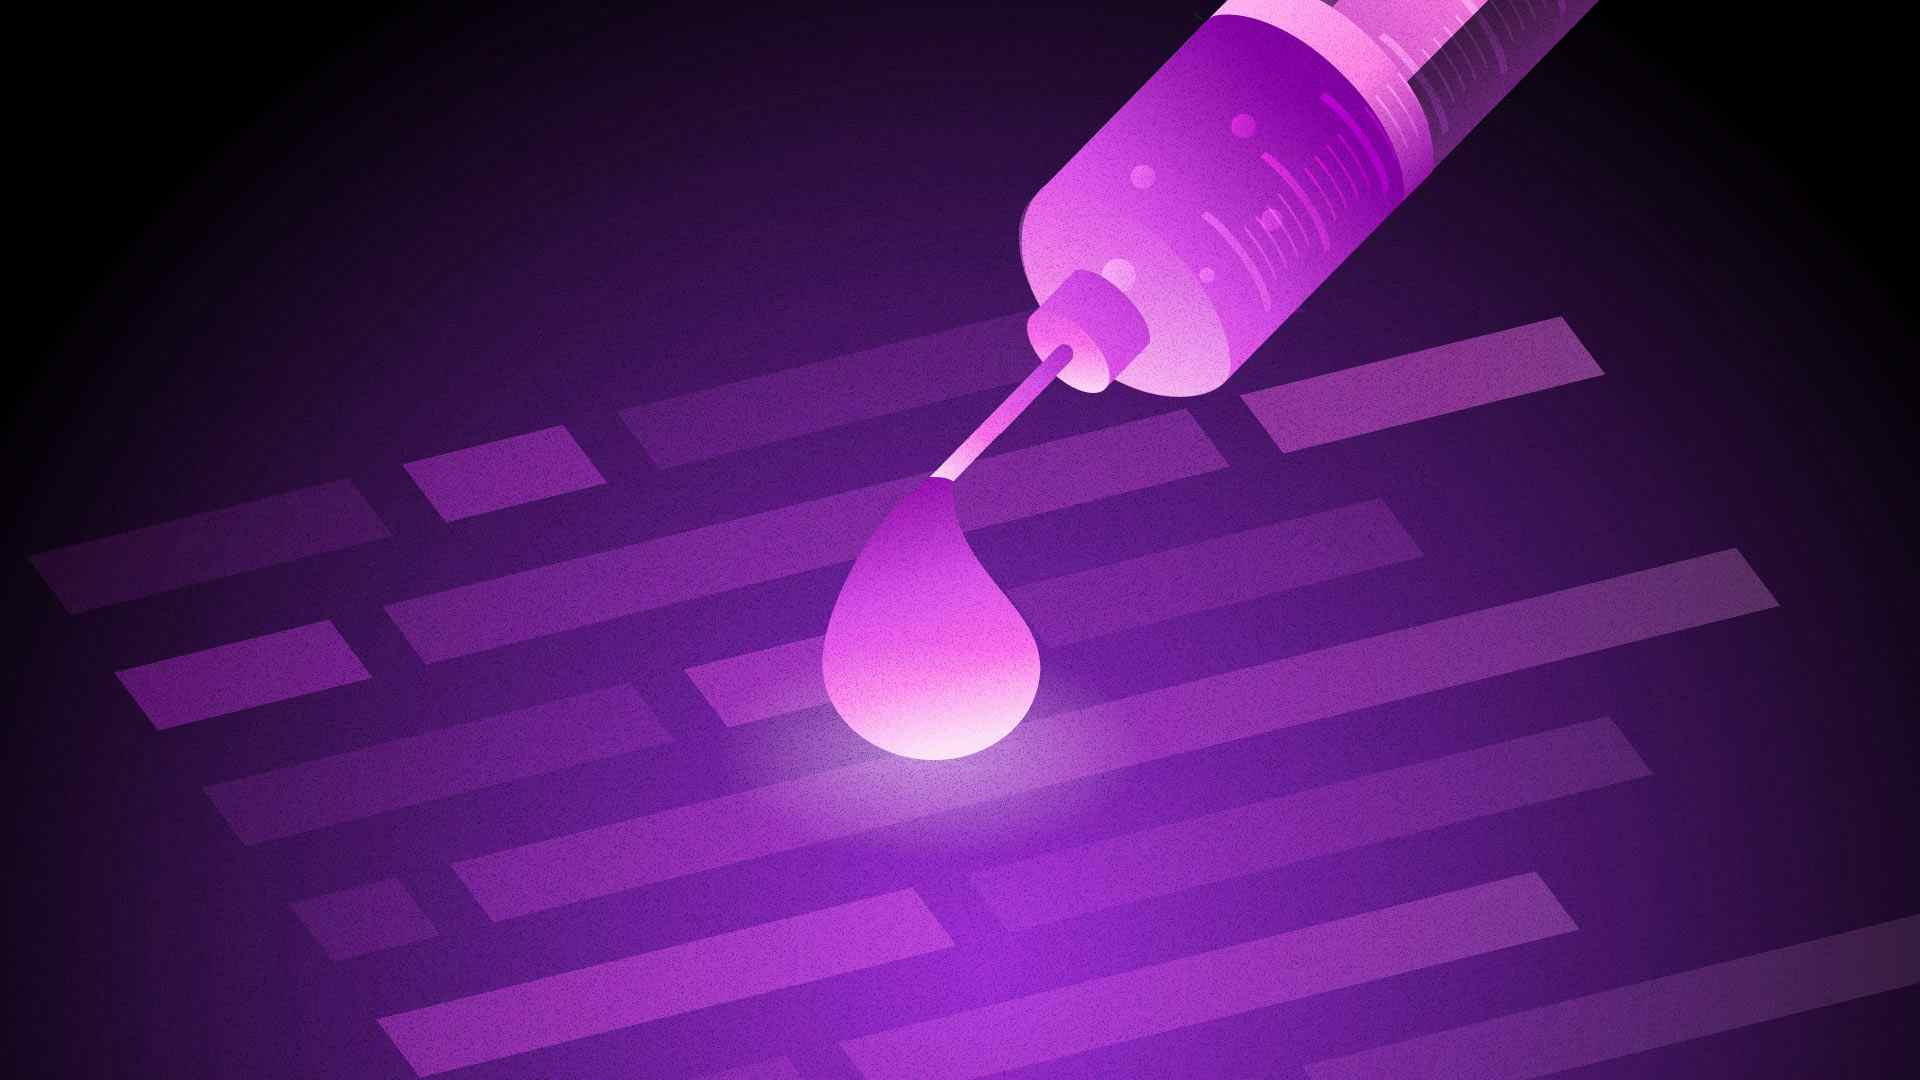 Advanced Dependency Injection in Elixir with Rewire